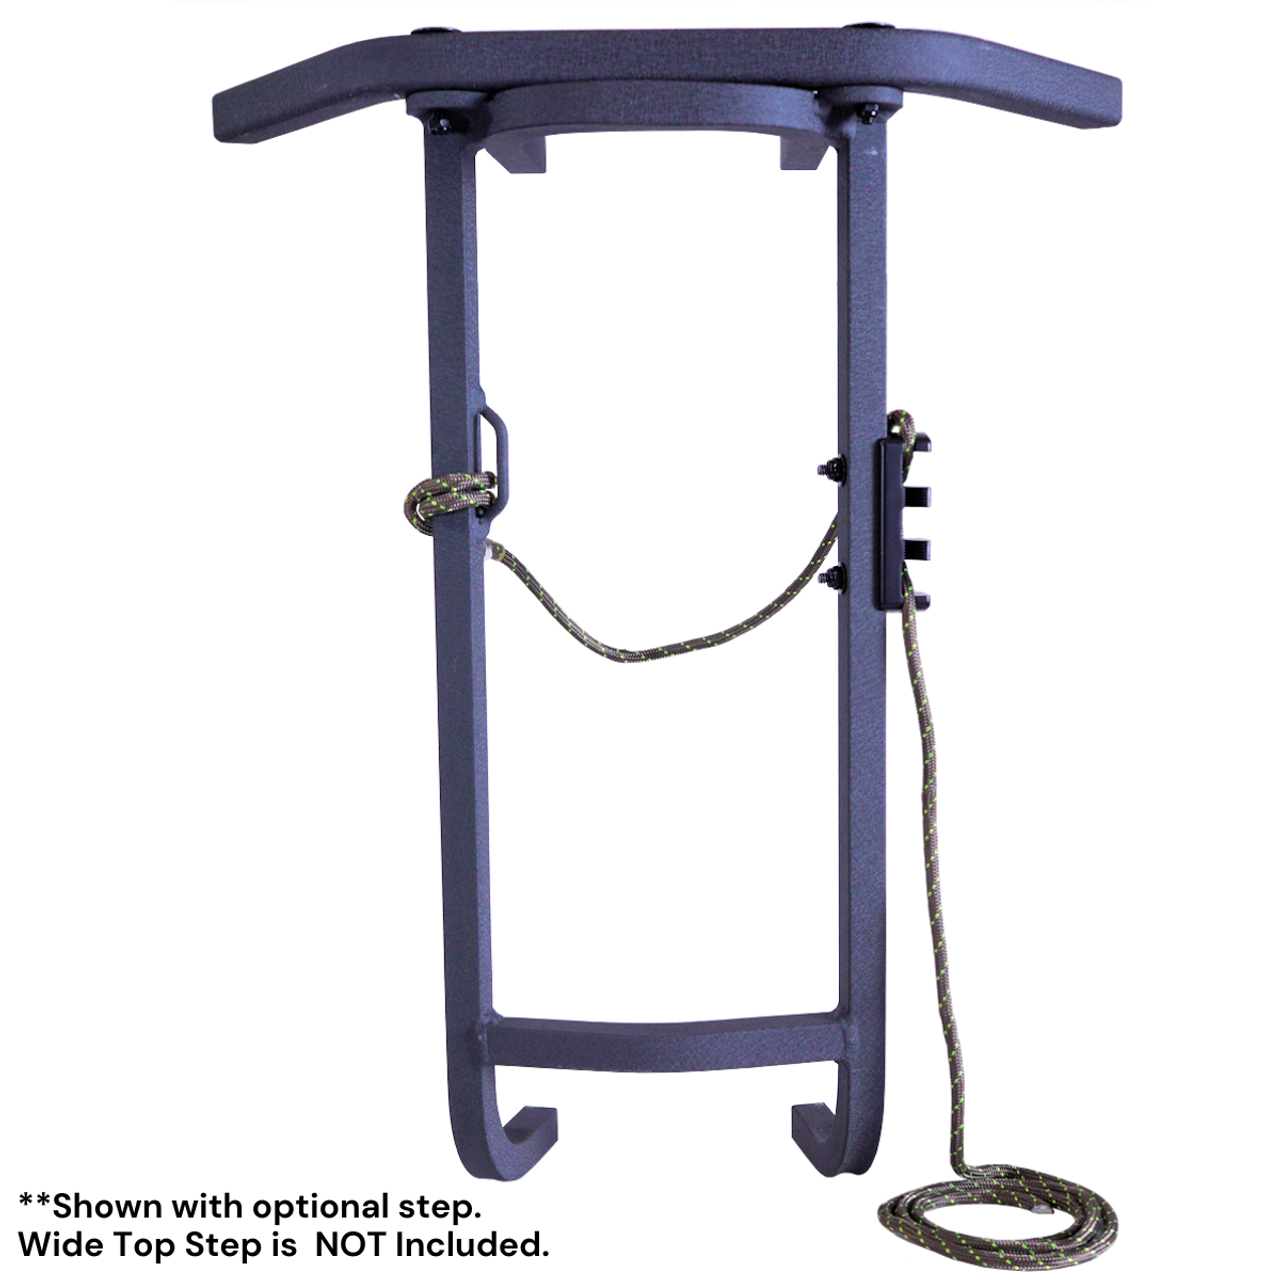 JX3 Climbing Stick For Saddle Hunting, One-Sticking